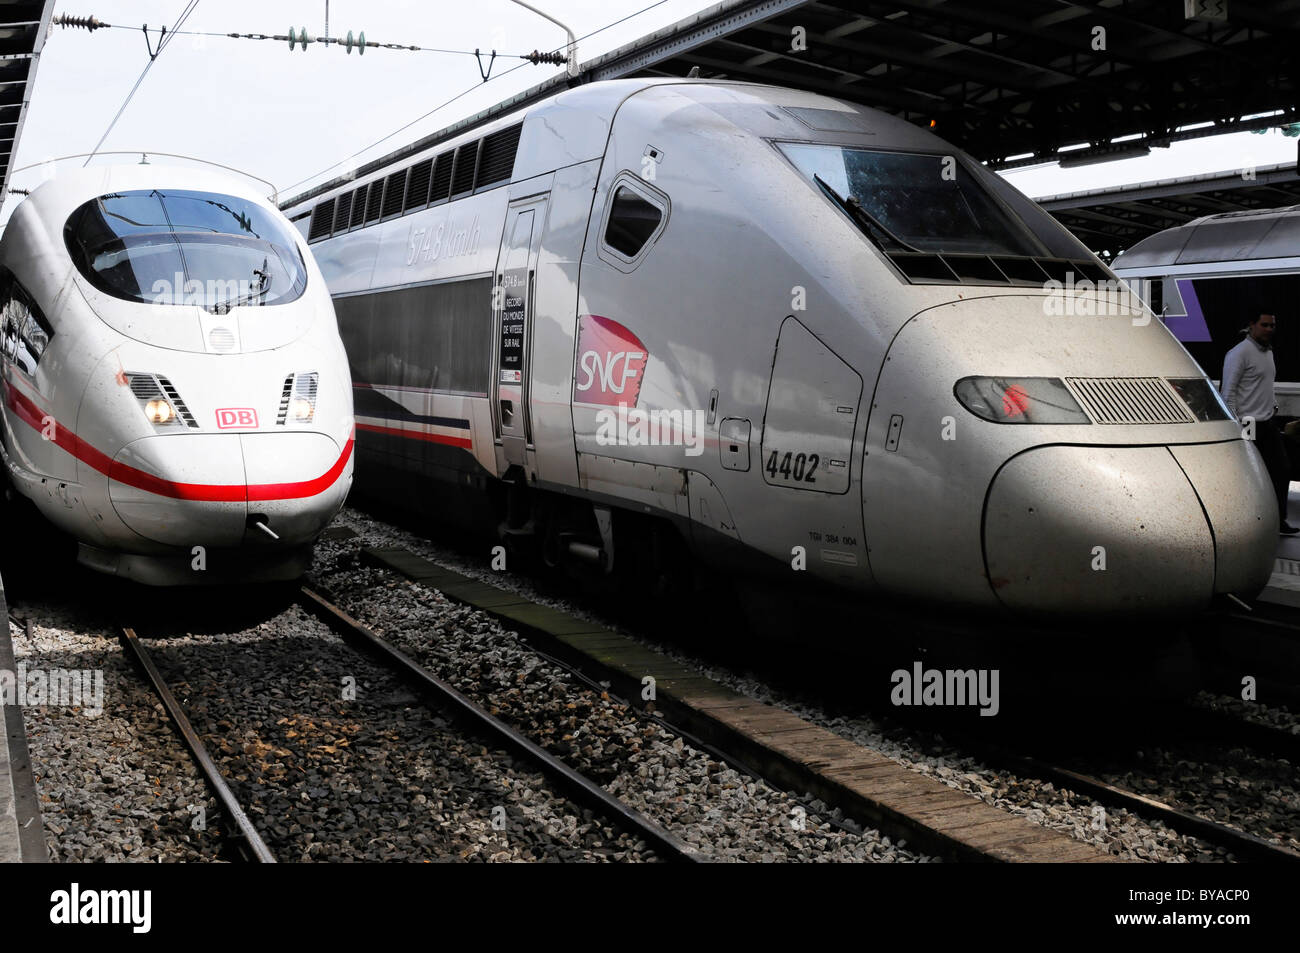 TGV, France's high-speed train and a ICE Intercity-Express train, Gare de I'Est, Paris East station, France, Europe Stock Photo